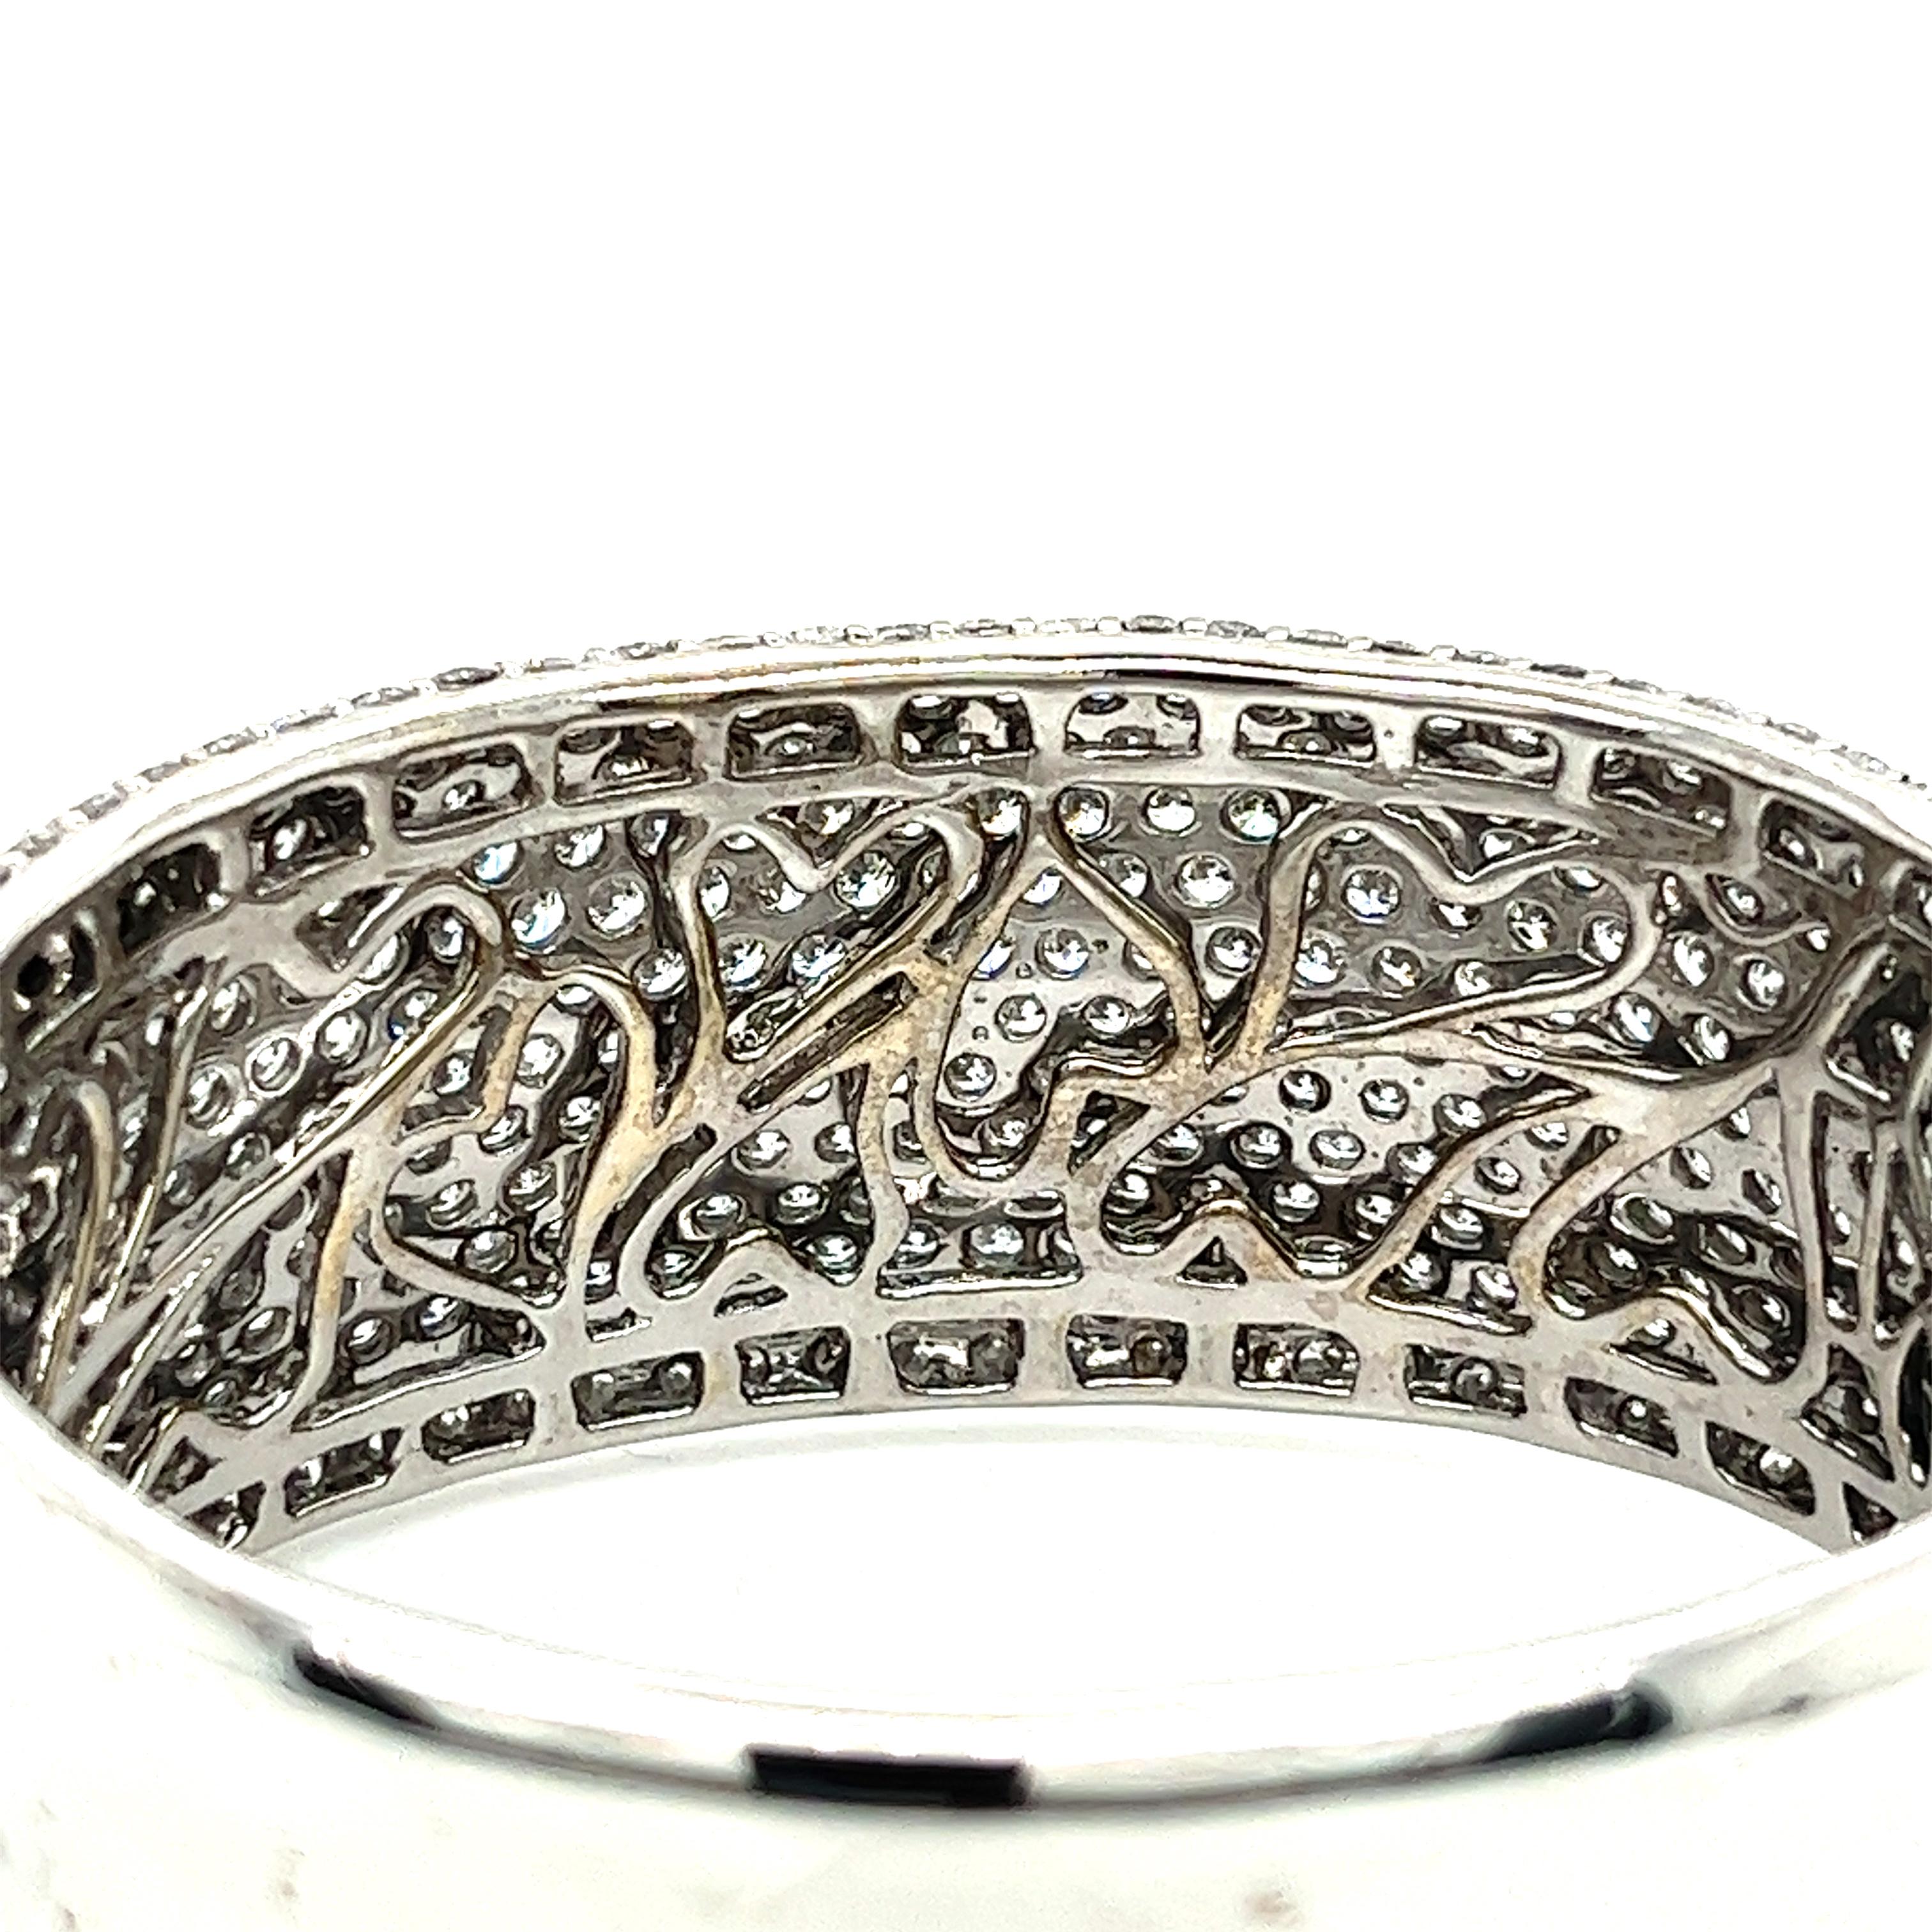 Vintage 20.40ctw Round Cut Diamond Encrusted 14k White Gold Bangle Bracelet In Good Condition For Sale In Miami, FL